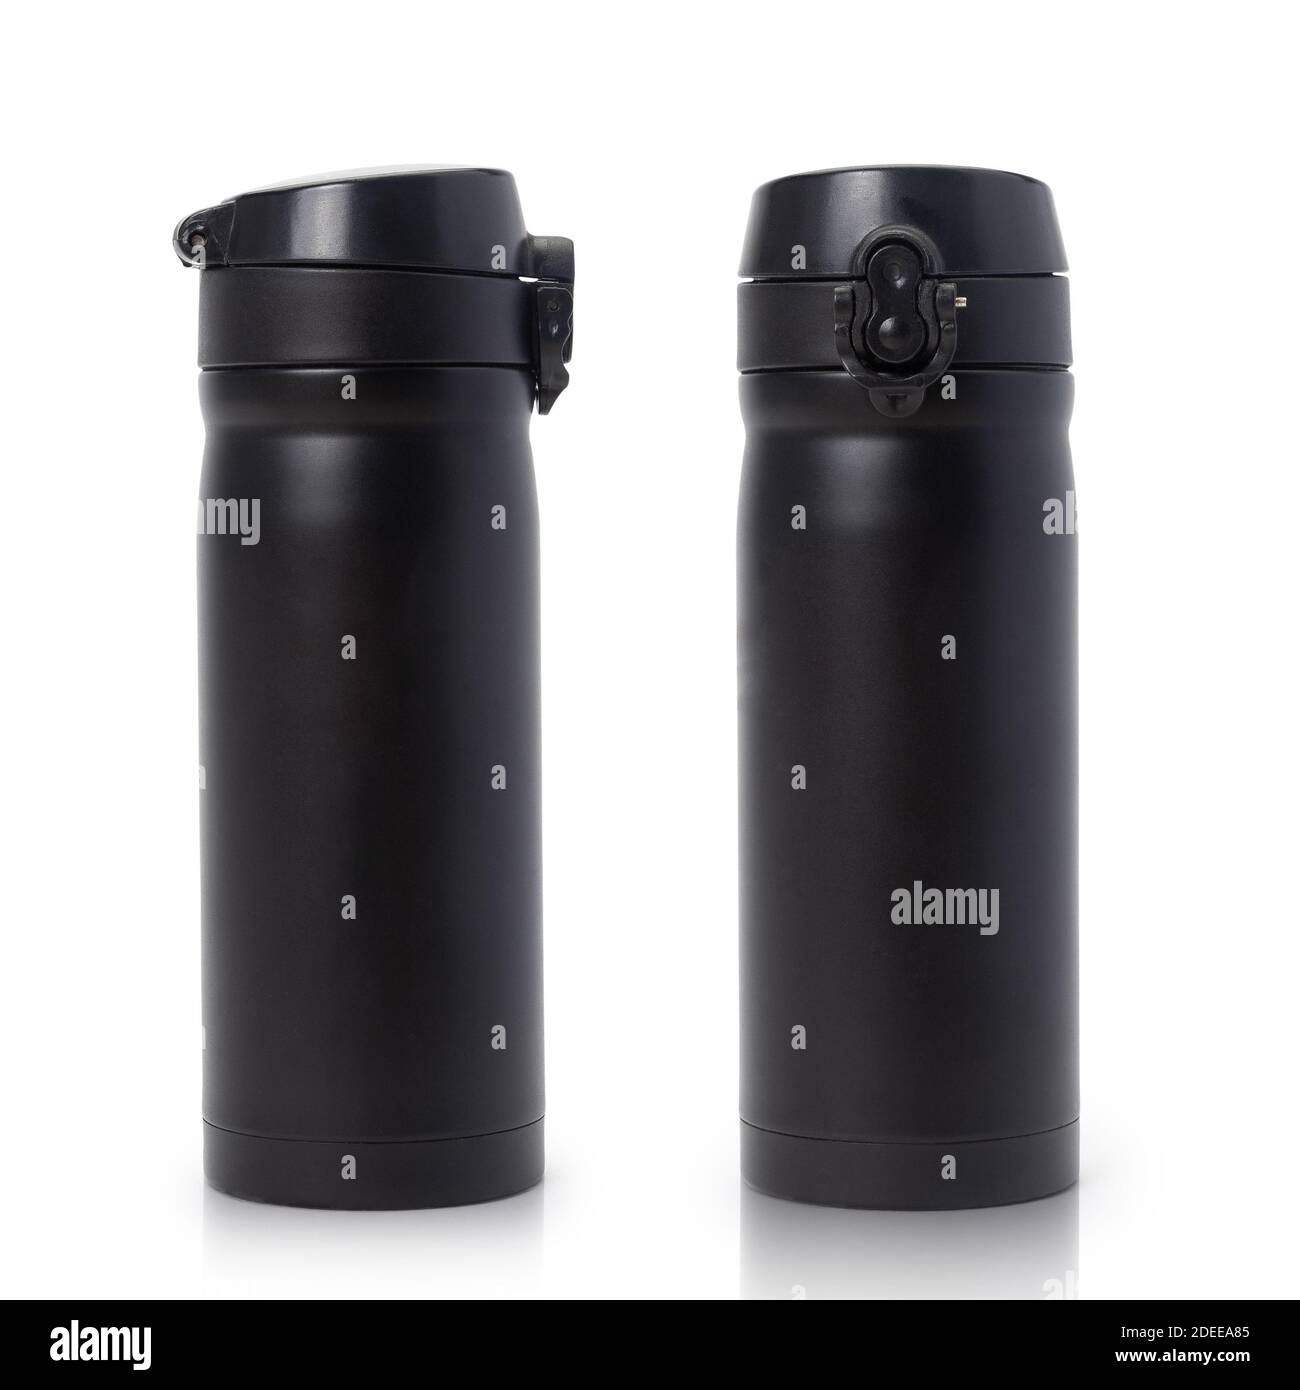 https://c8.alamy.com/comp/2DEEA85/black-steel-thermo-water-bottle-mockup-isolated-on-white-background-with-clipping-path-2DEEA85.jpg